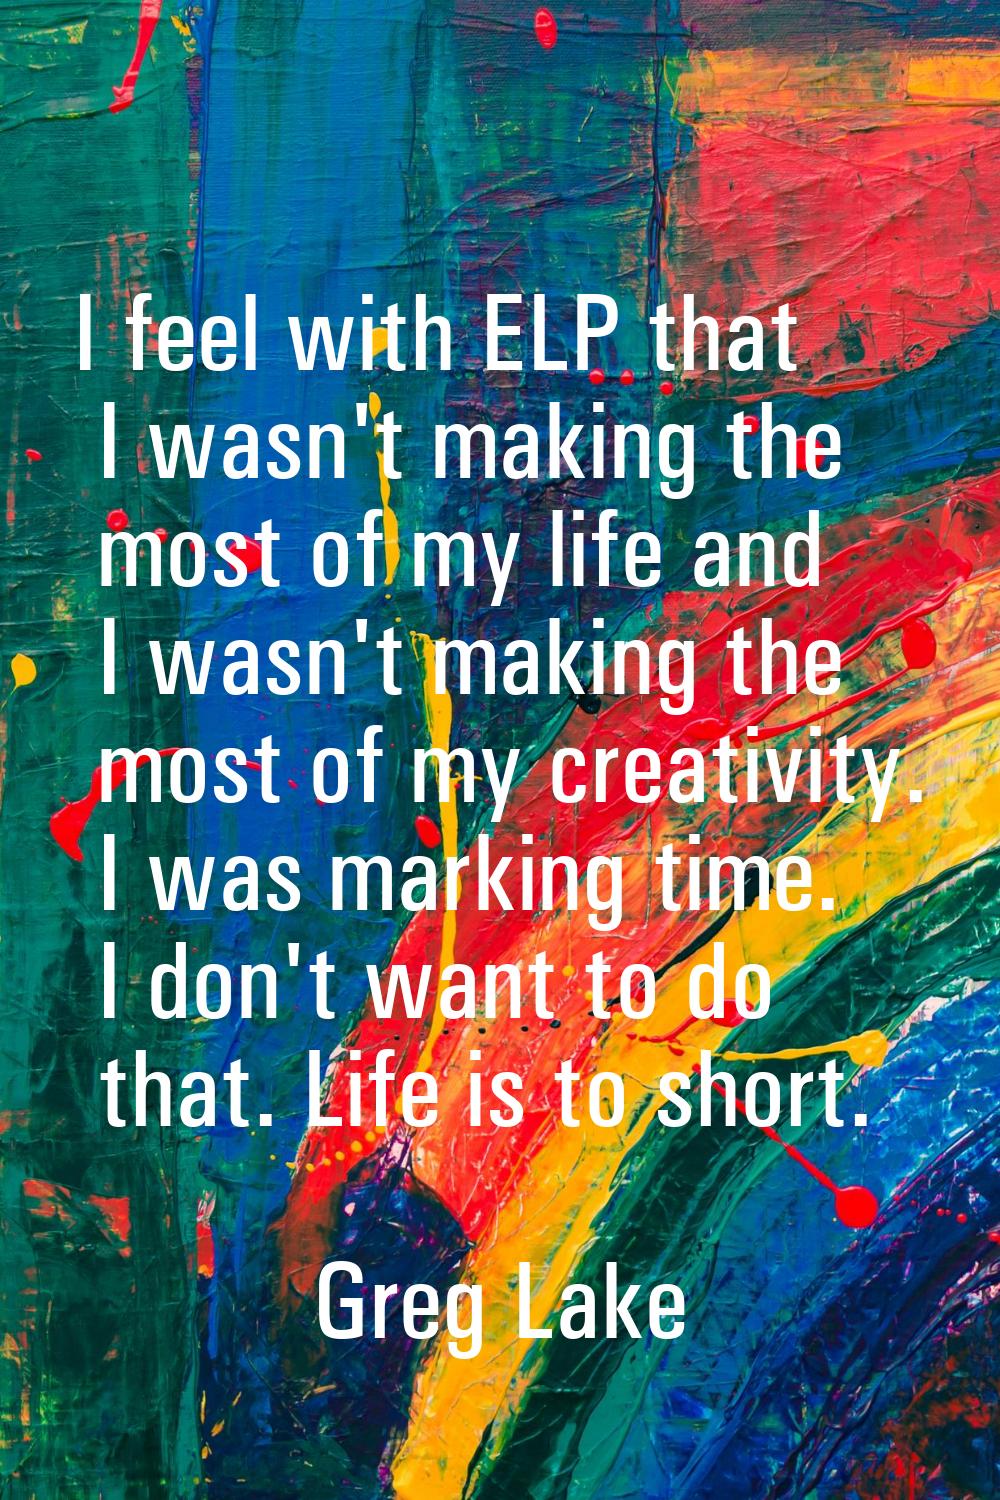 I feel with ELP that I wasn't making the most of my life and I wasn't making the most of my creativ